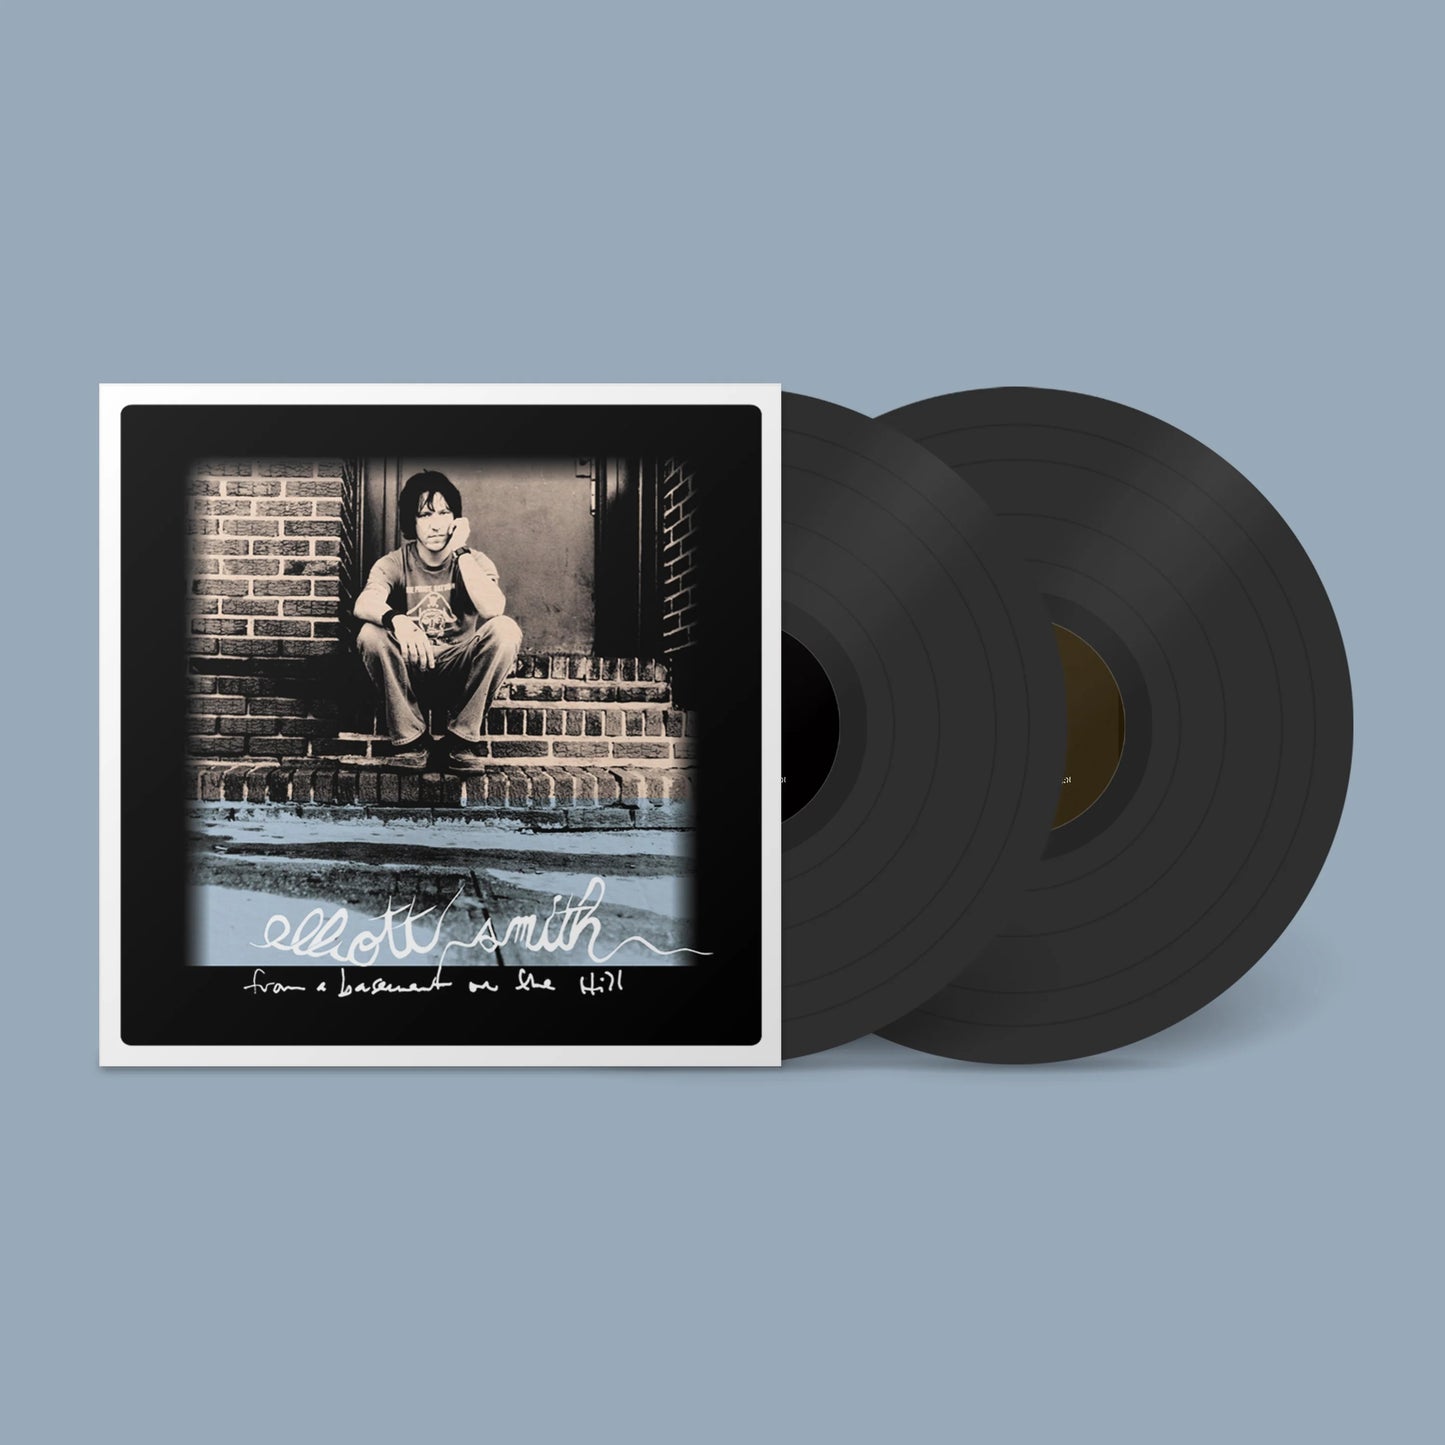  Elliott Smith – From A Basement On The Hill | Buy the Vinyl LP from Flying Nun Records